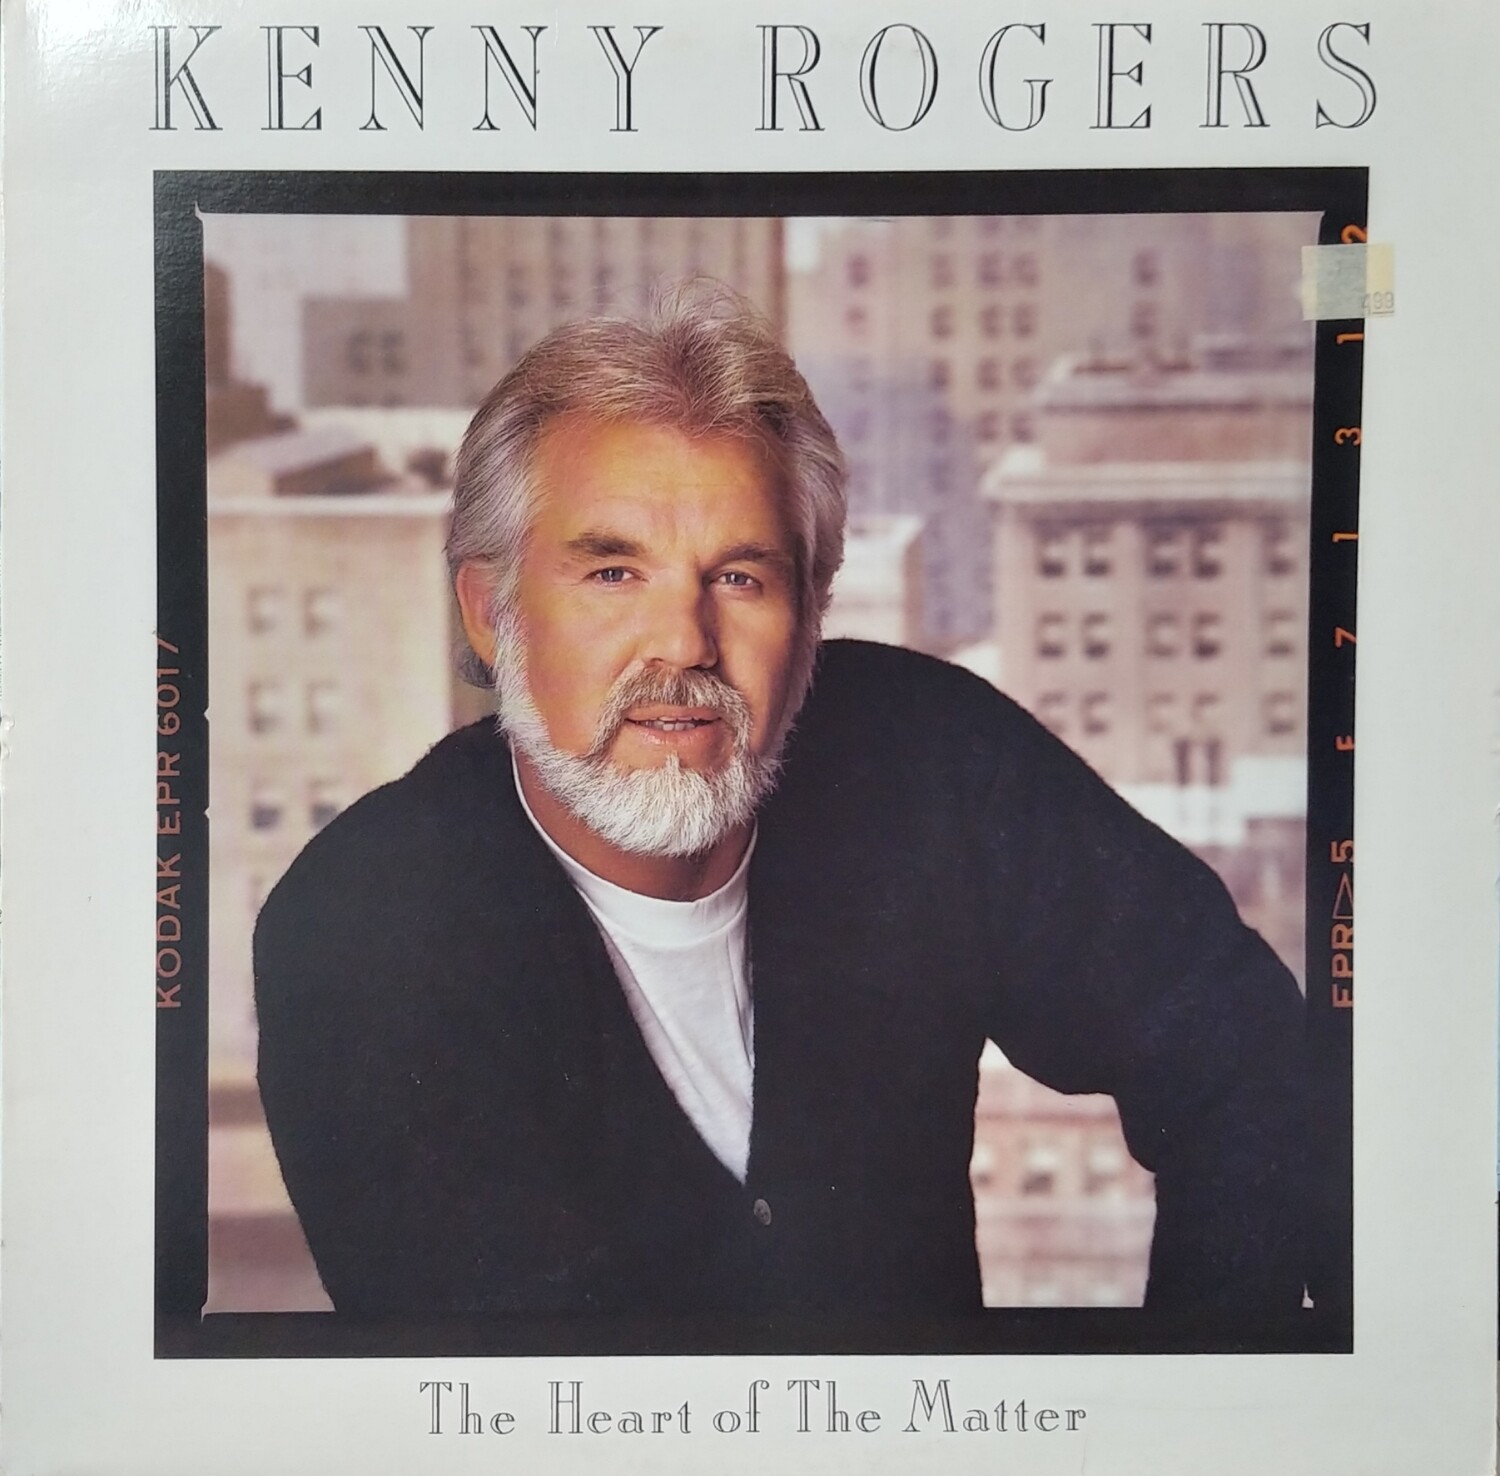 Kenny Rogers - The Heart of The Matter